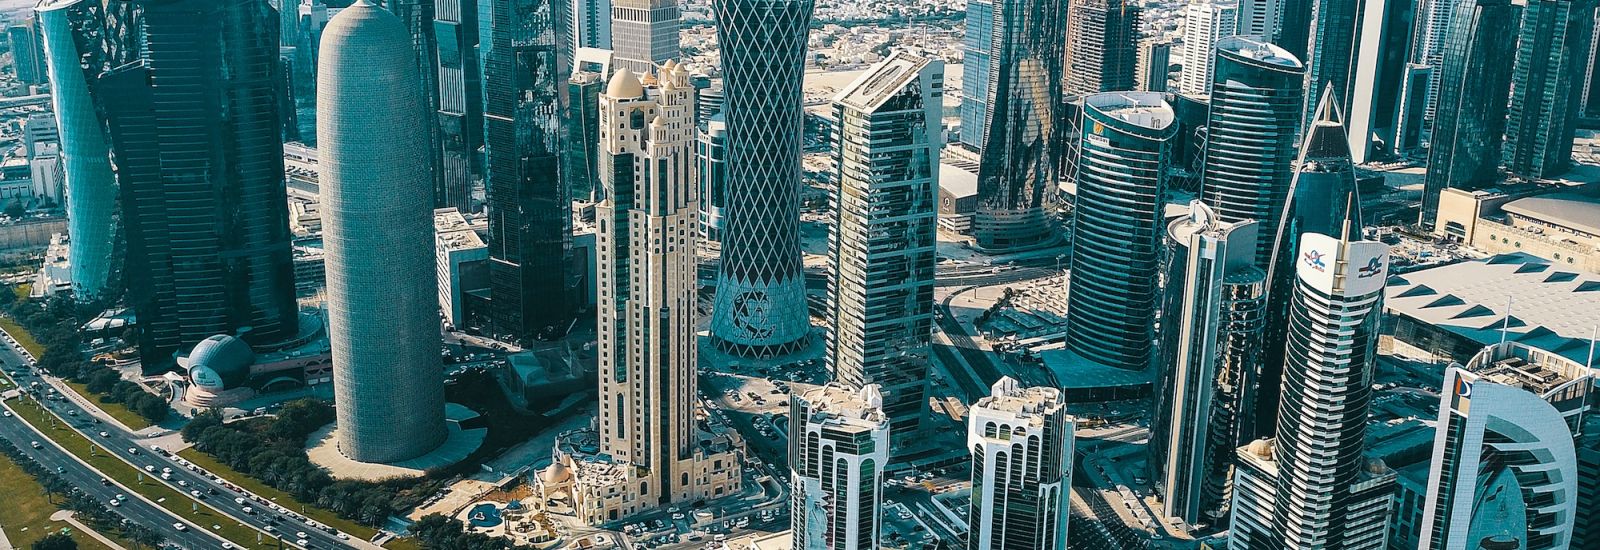 Aerial View of Downtown Doha Qatar Modern Skyscrapers